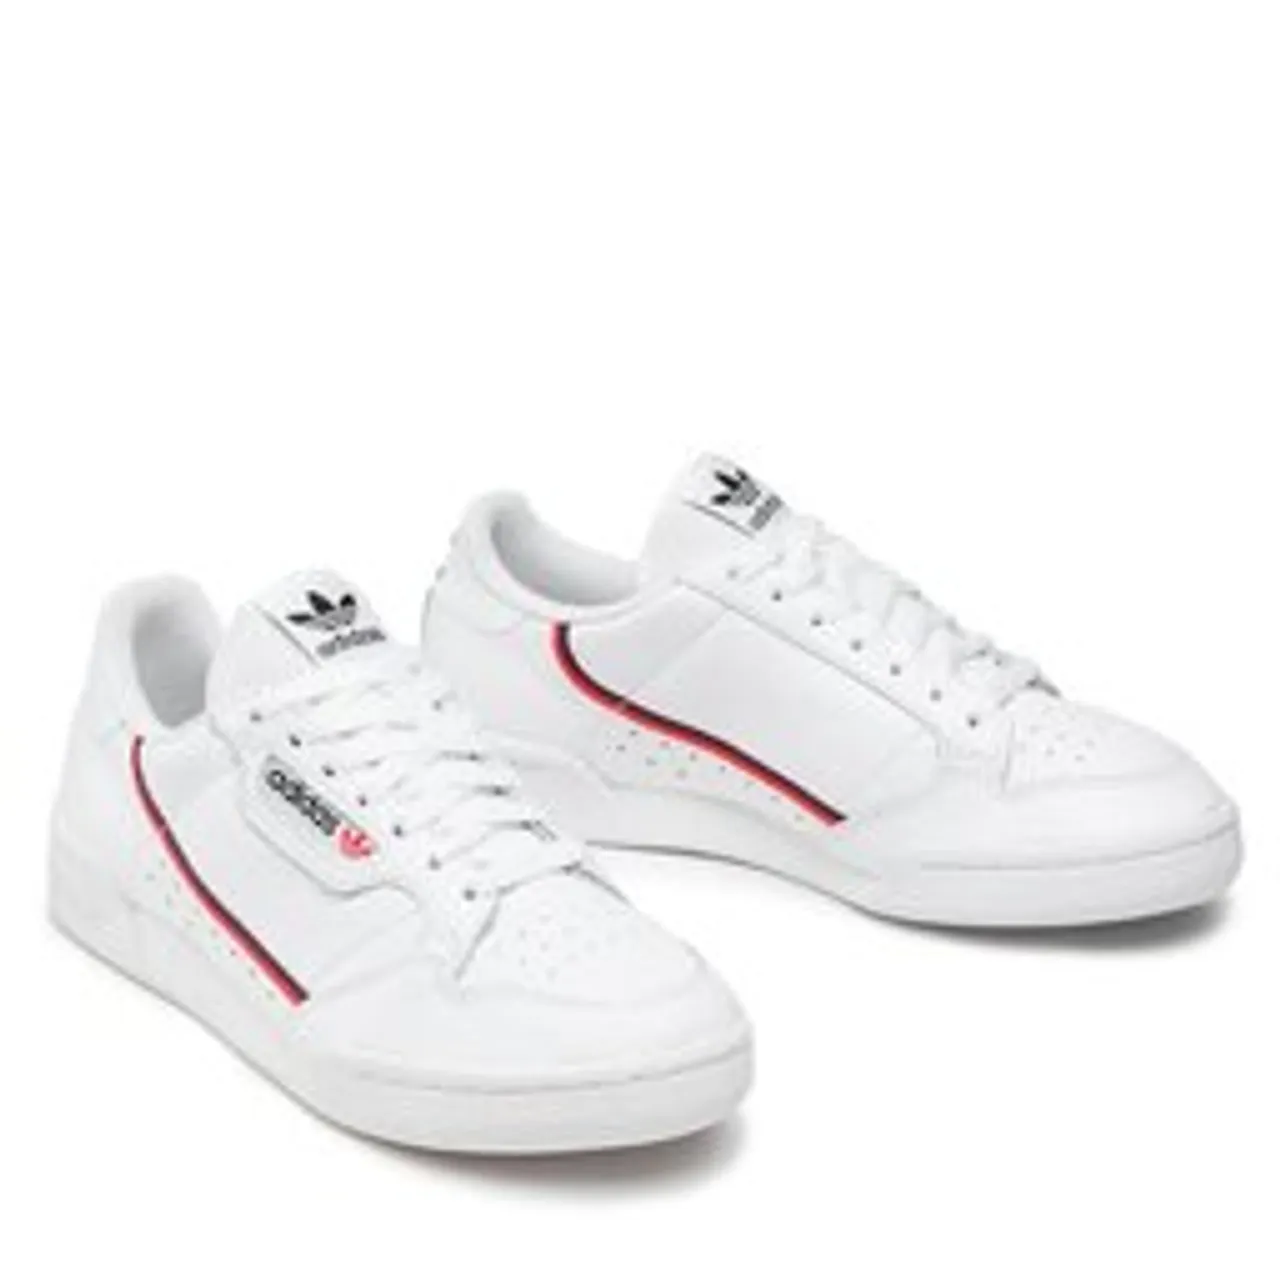 Sneakers adidas Continental 80 Shoes G27706 Weiß